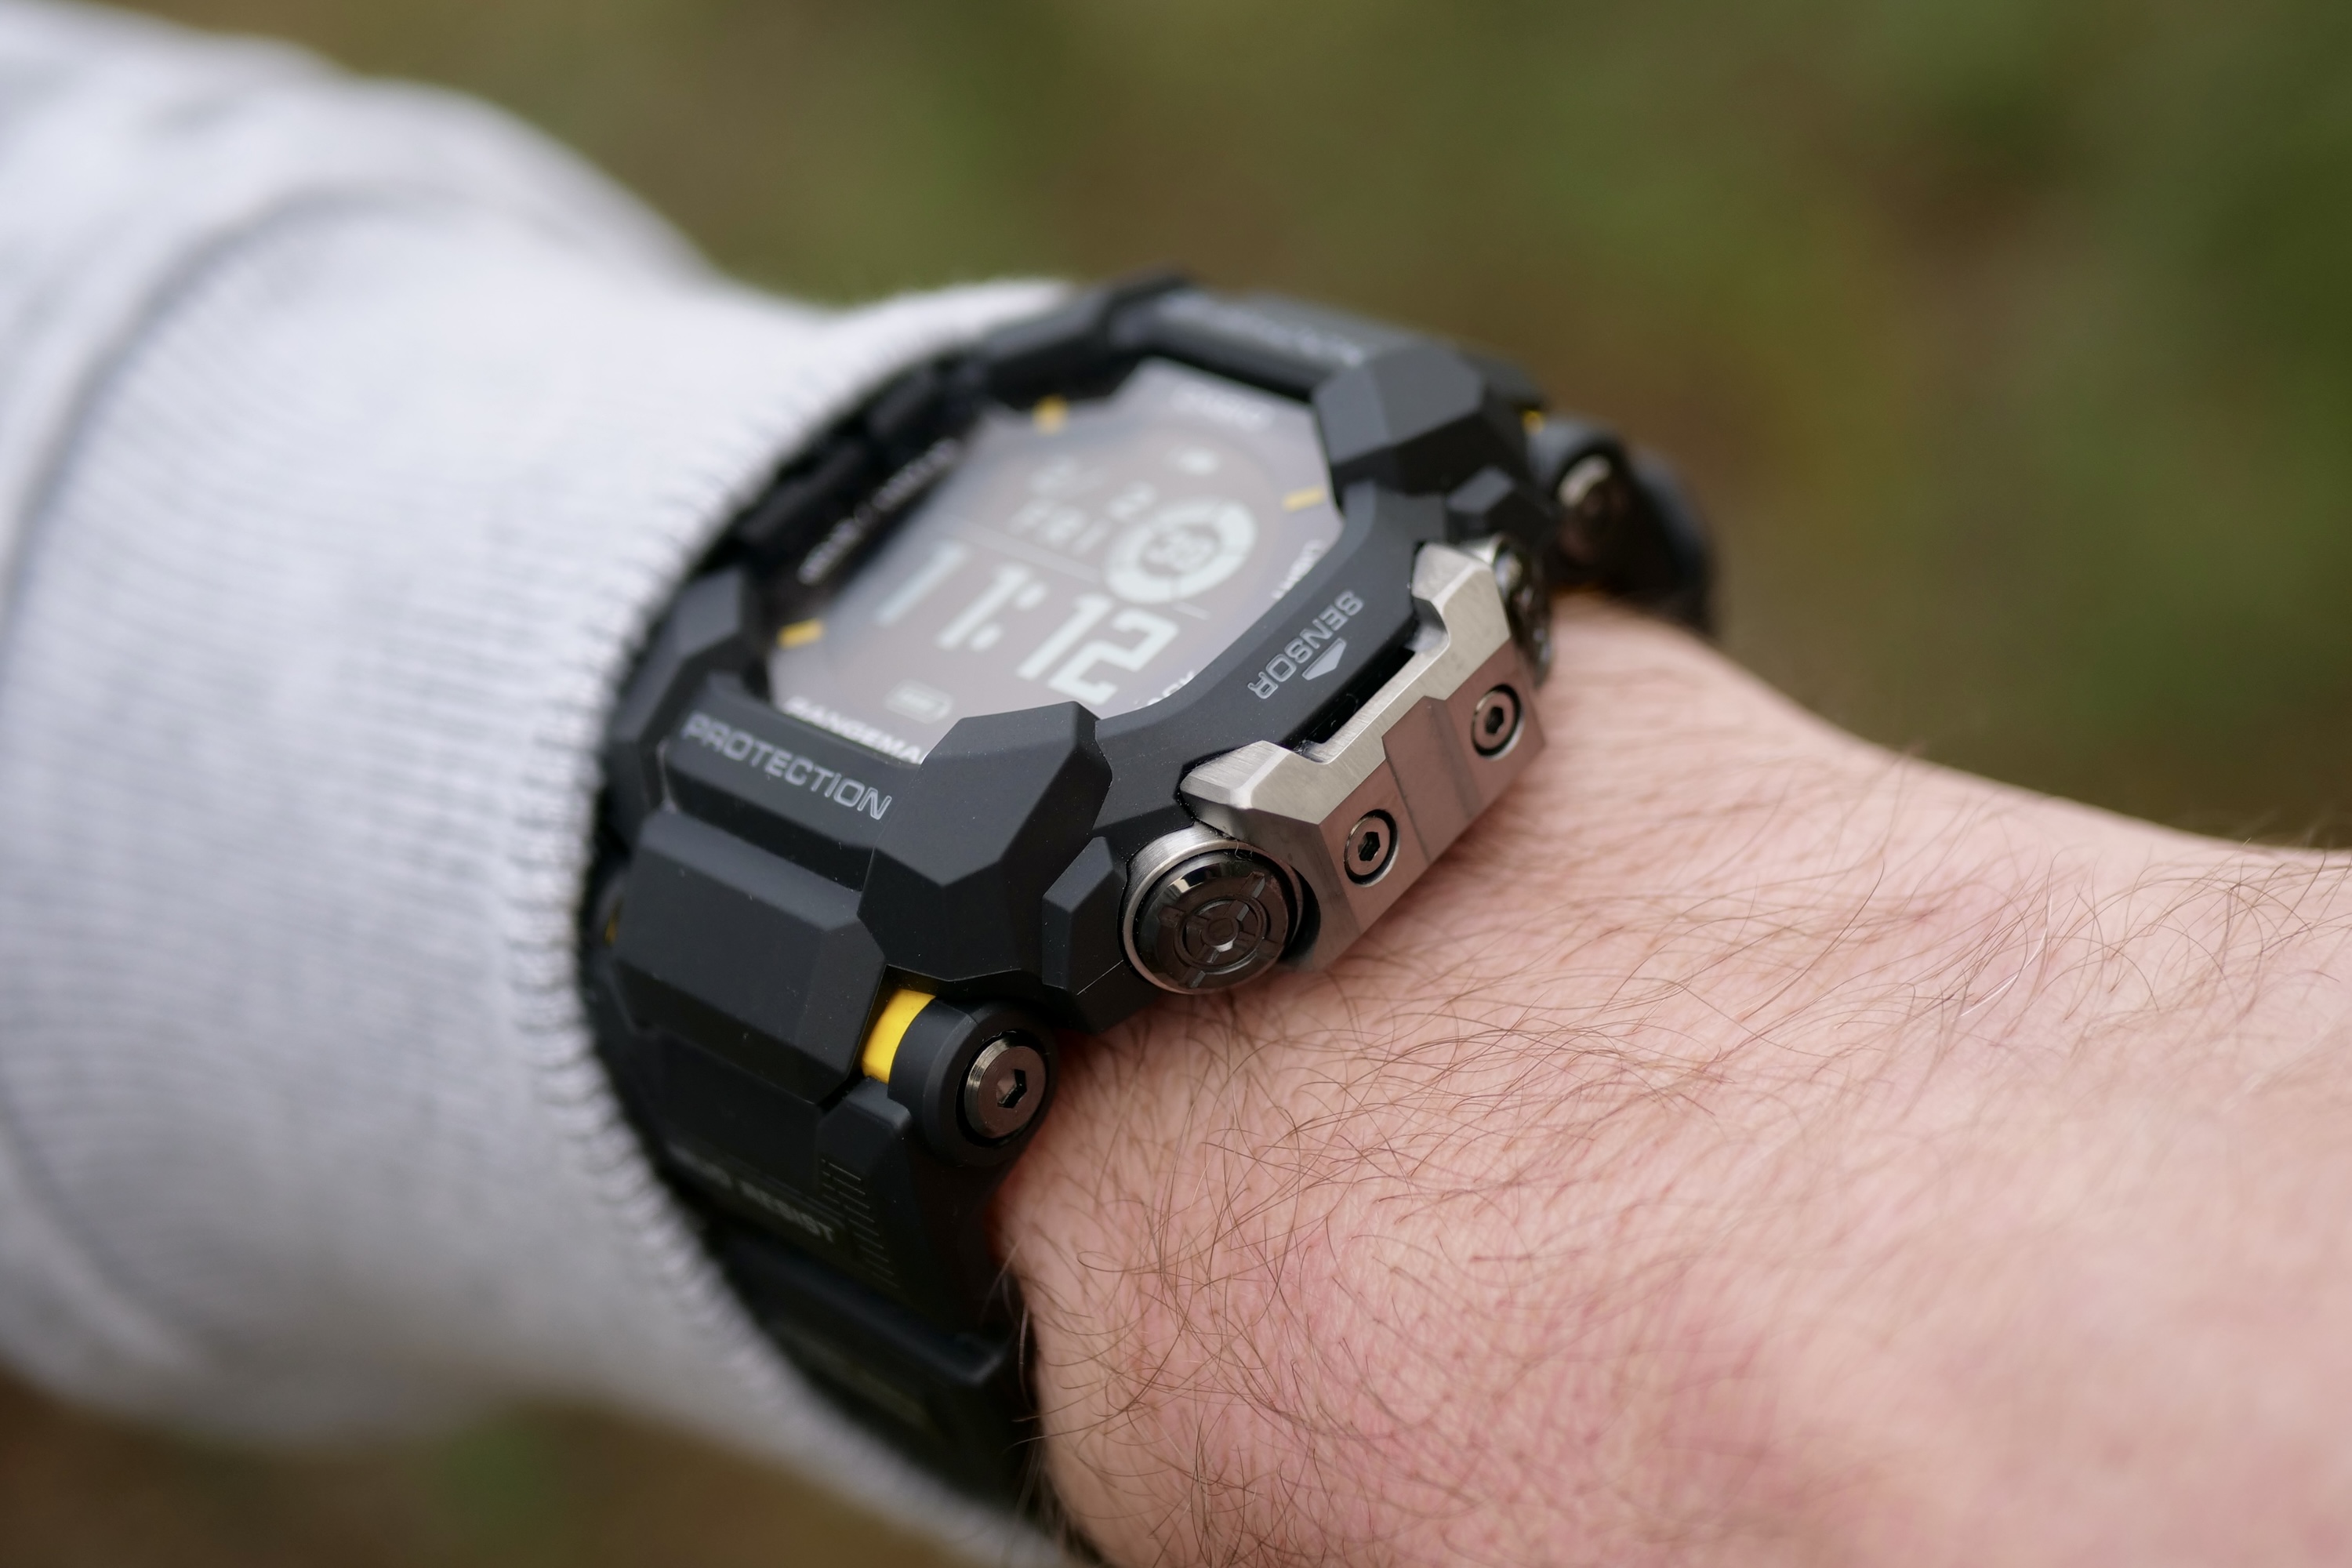 Casio G-Shock GSW-H1000 review: bad timing - The Verge